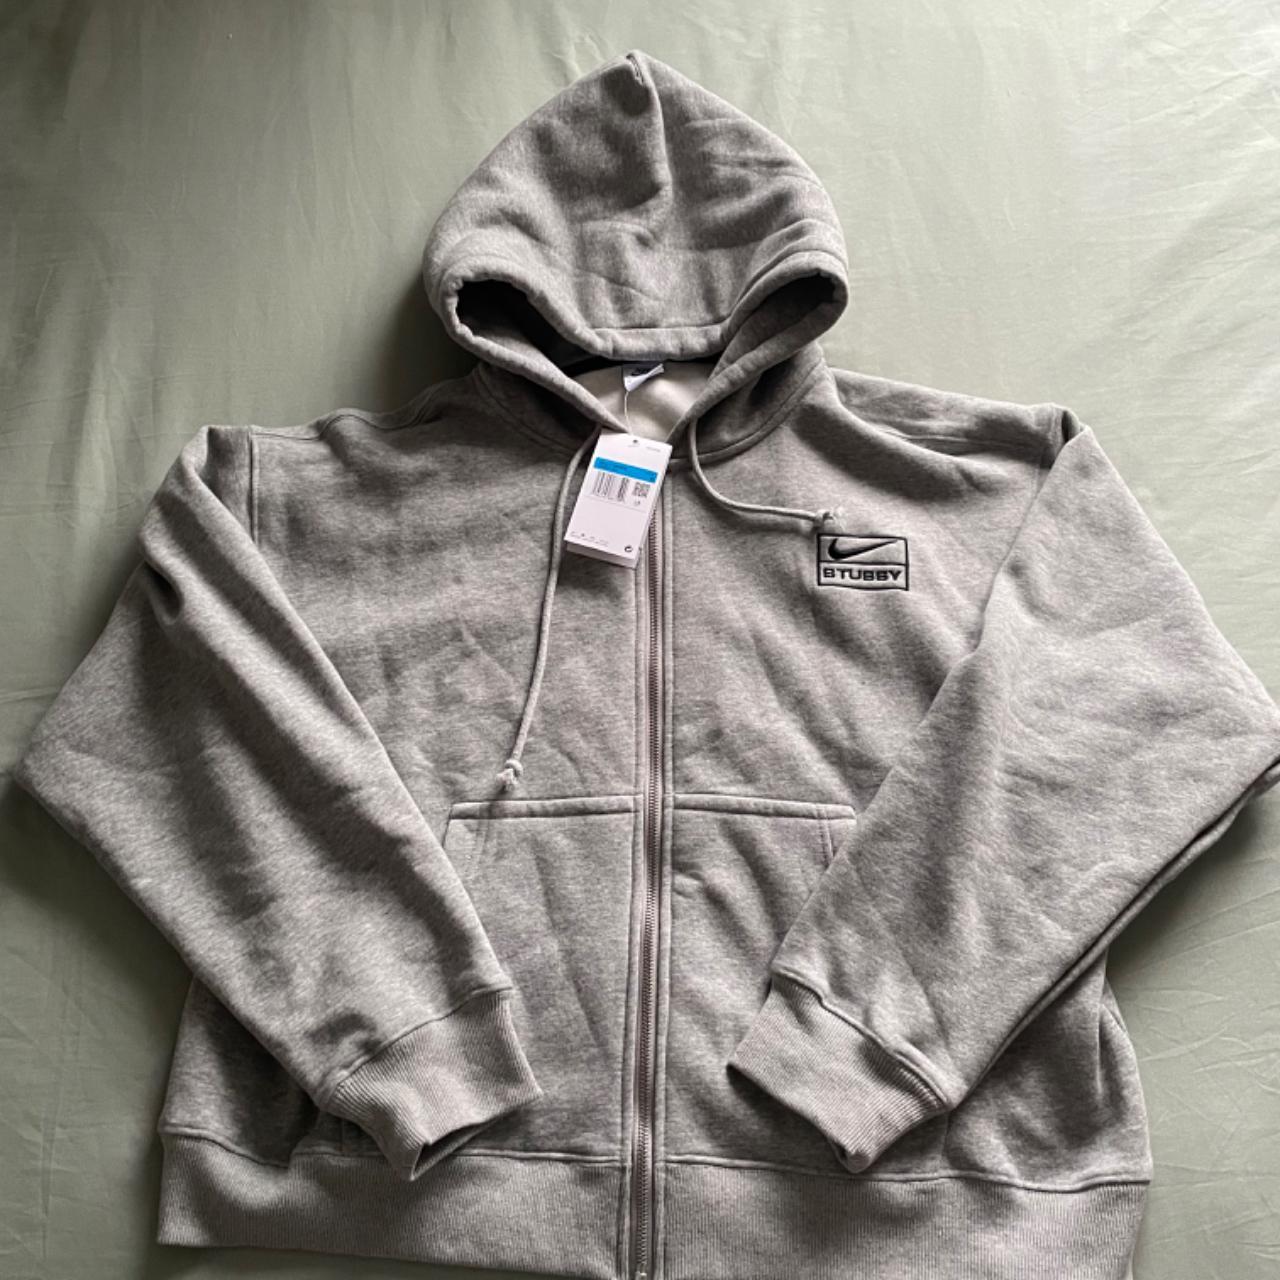 Nike x Stussy zip up - brand new with tags size... - Depop